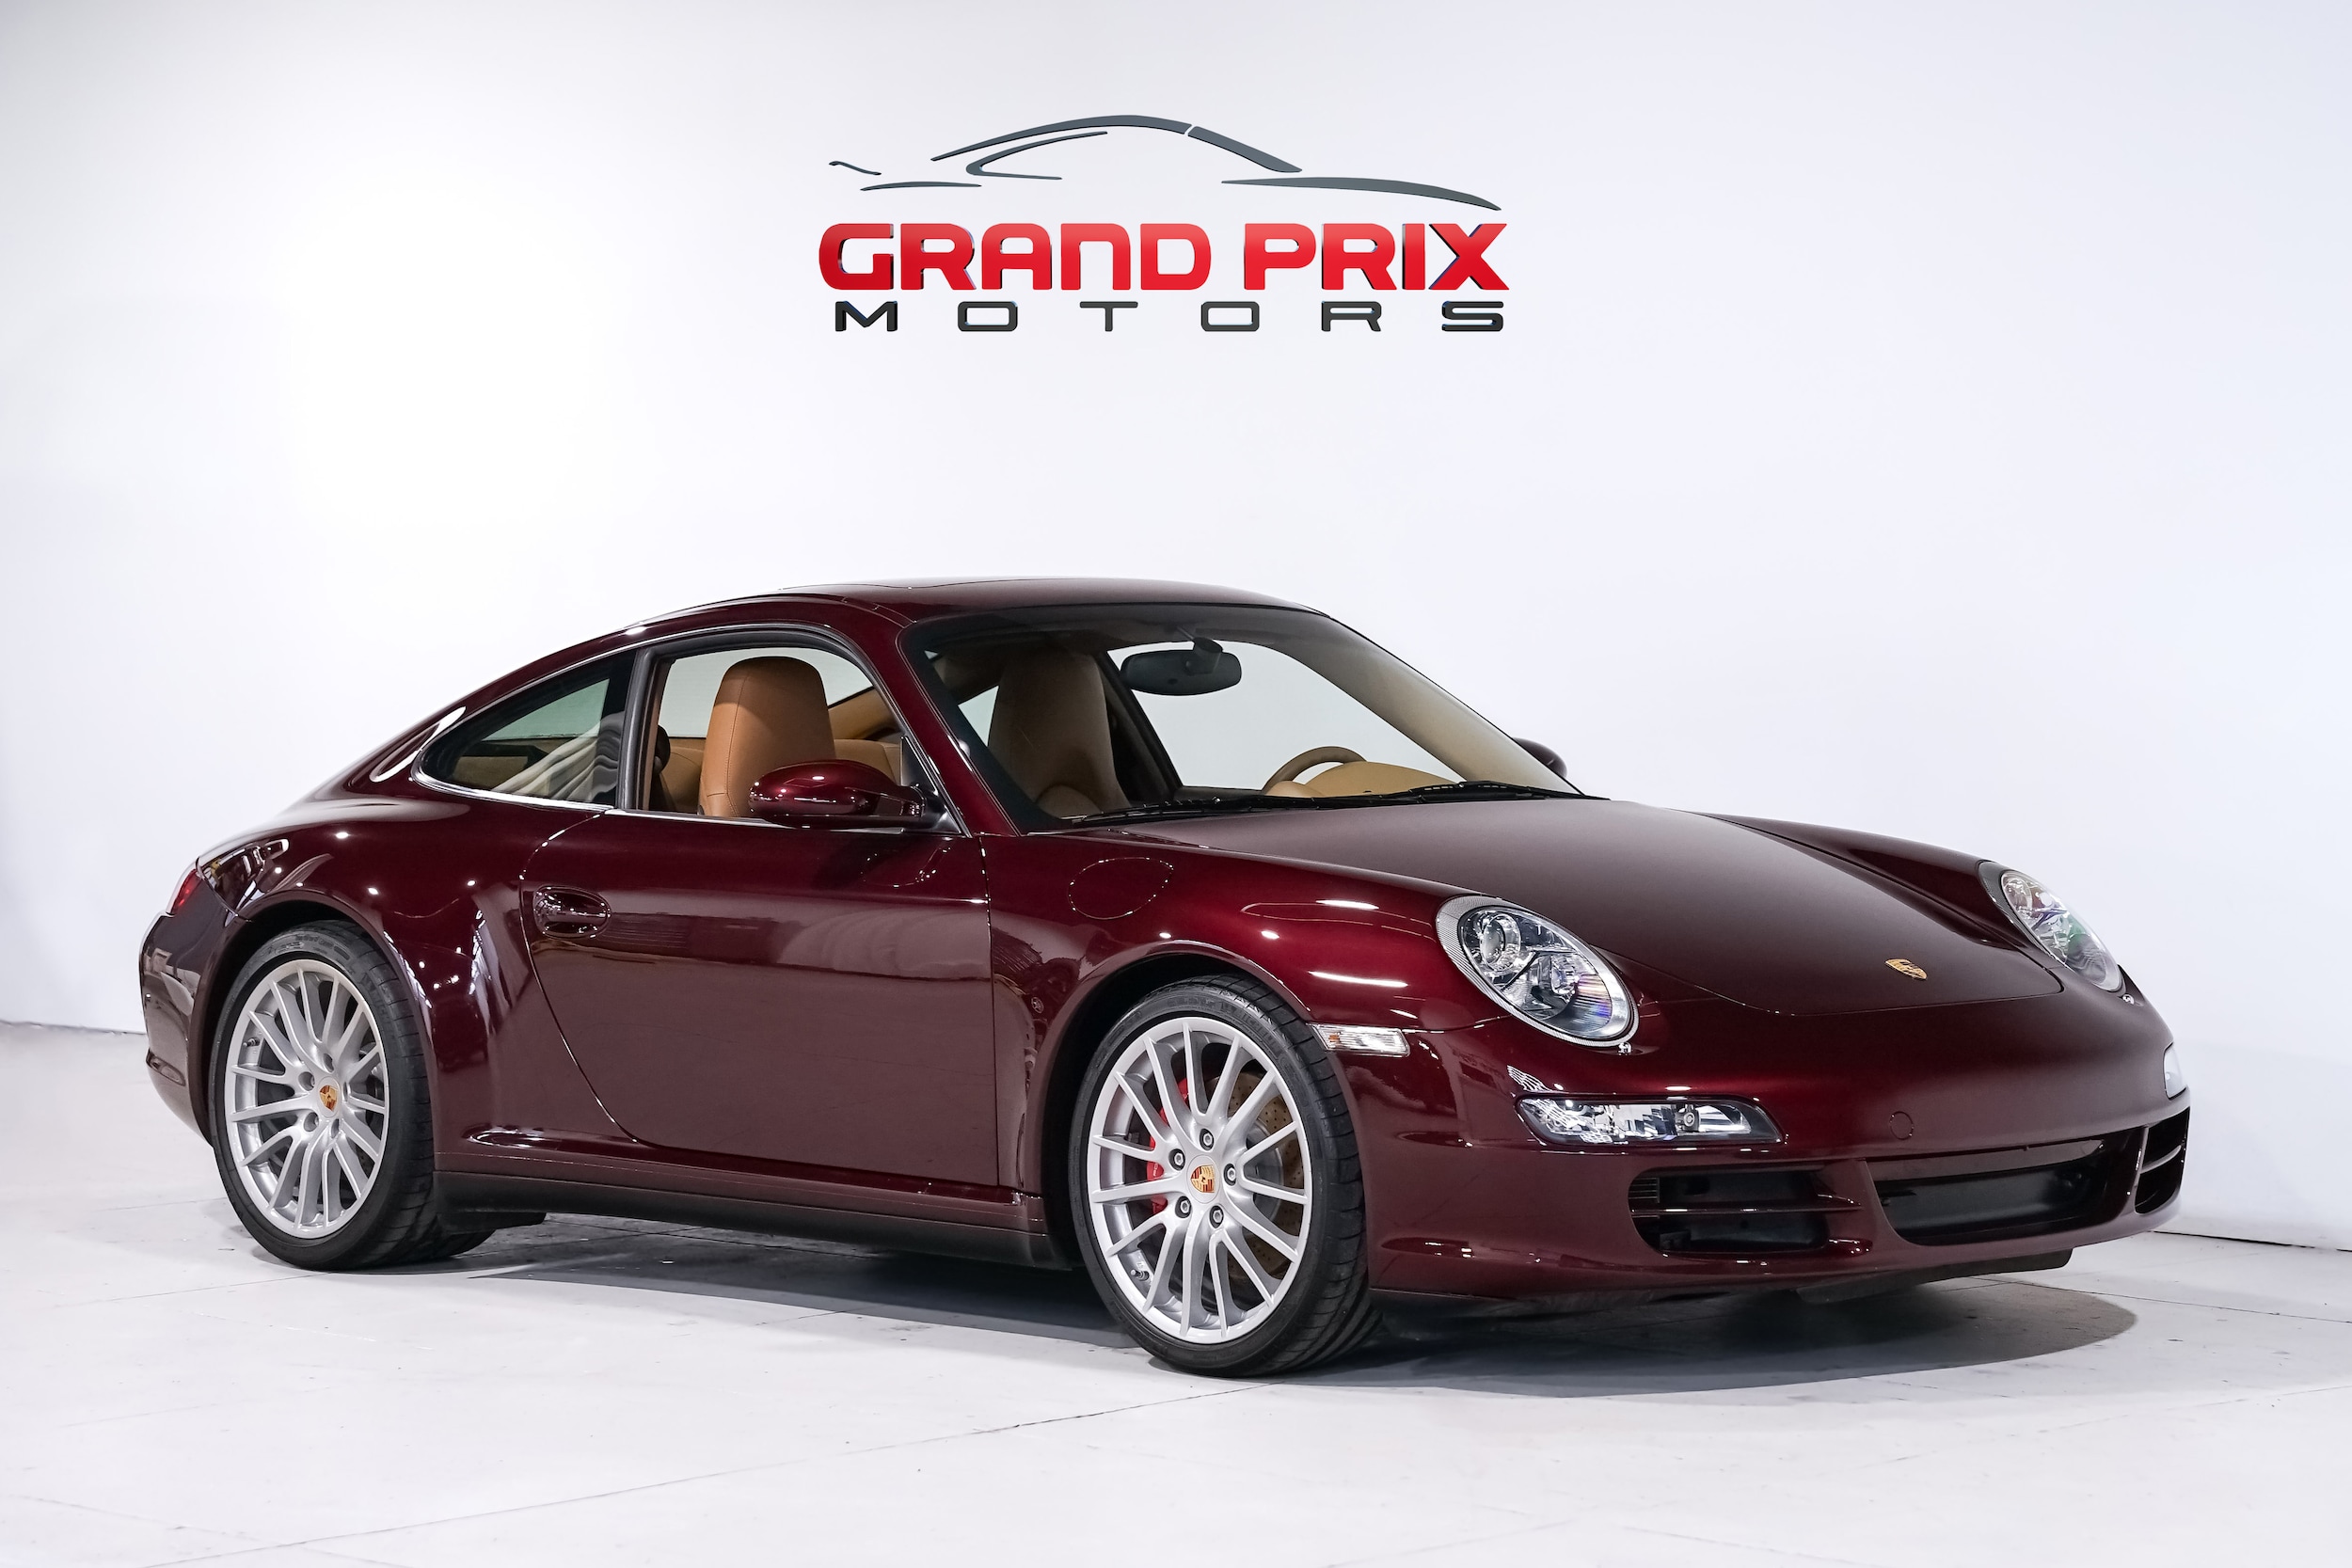 Used 2006 Porsche 911 For Sale | Portland OR WP0AB29996S744298